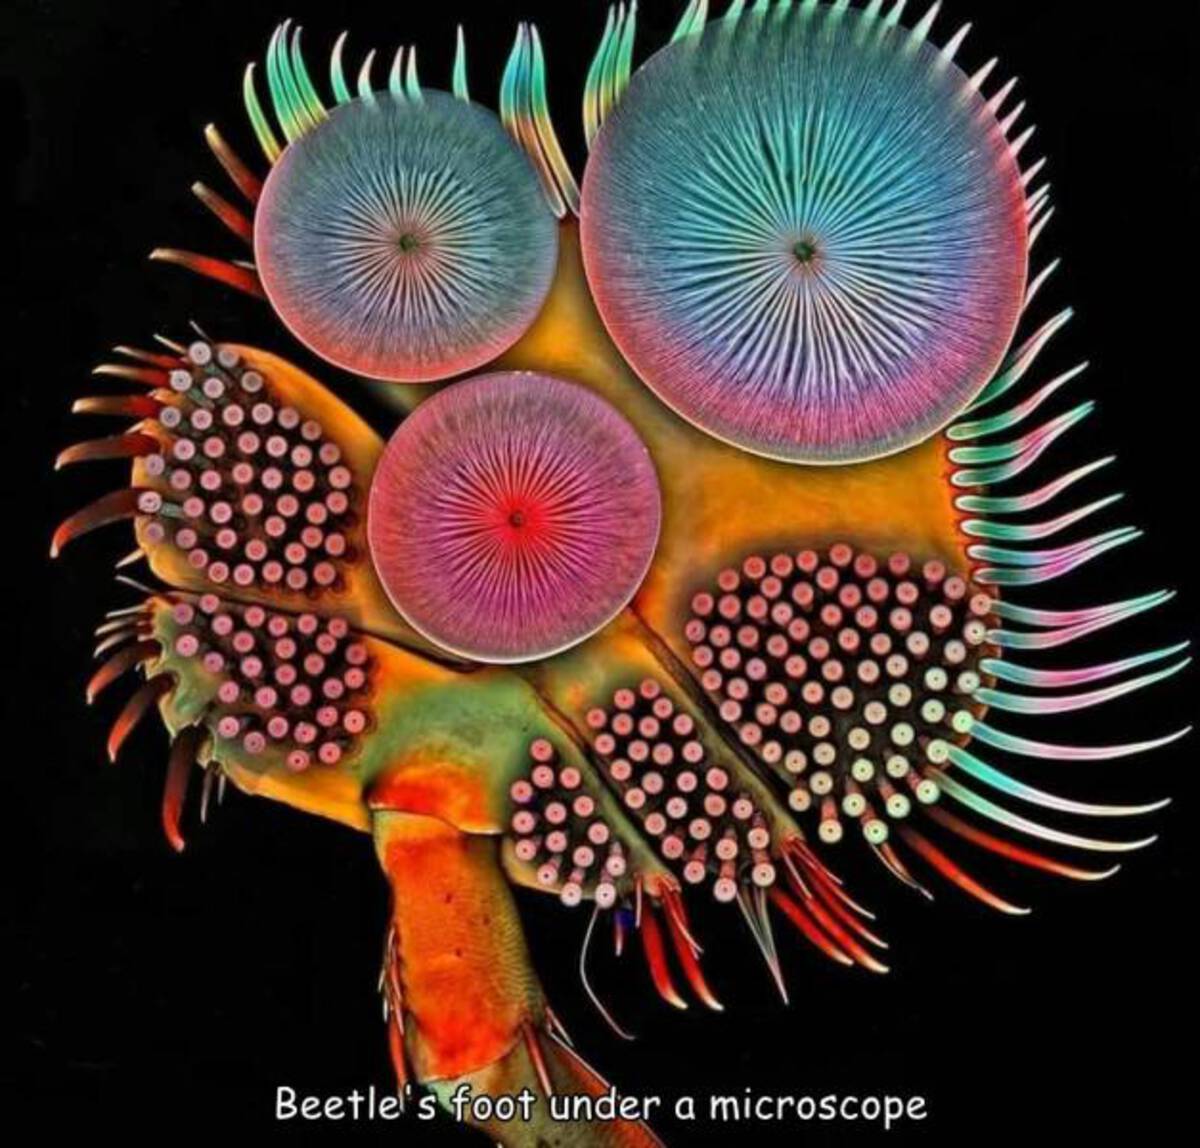 male diving beetle - Beetle's foot under a microscope